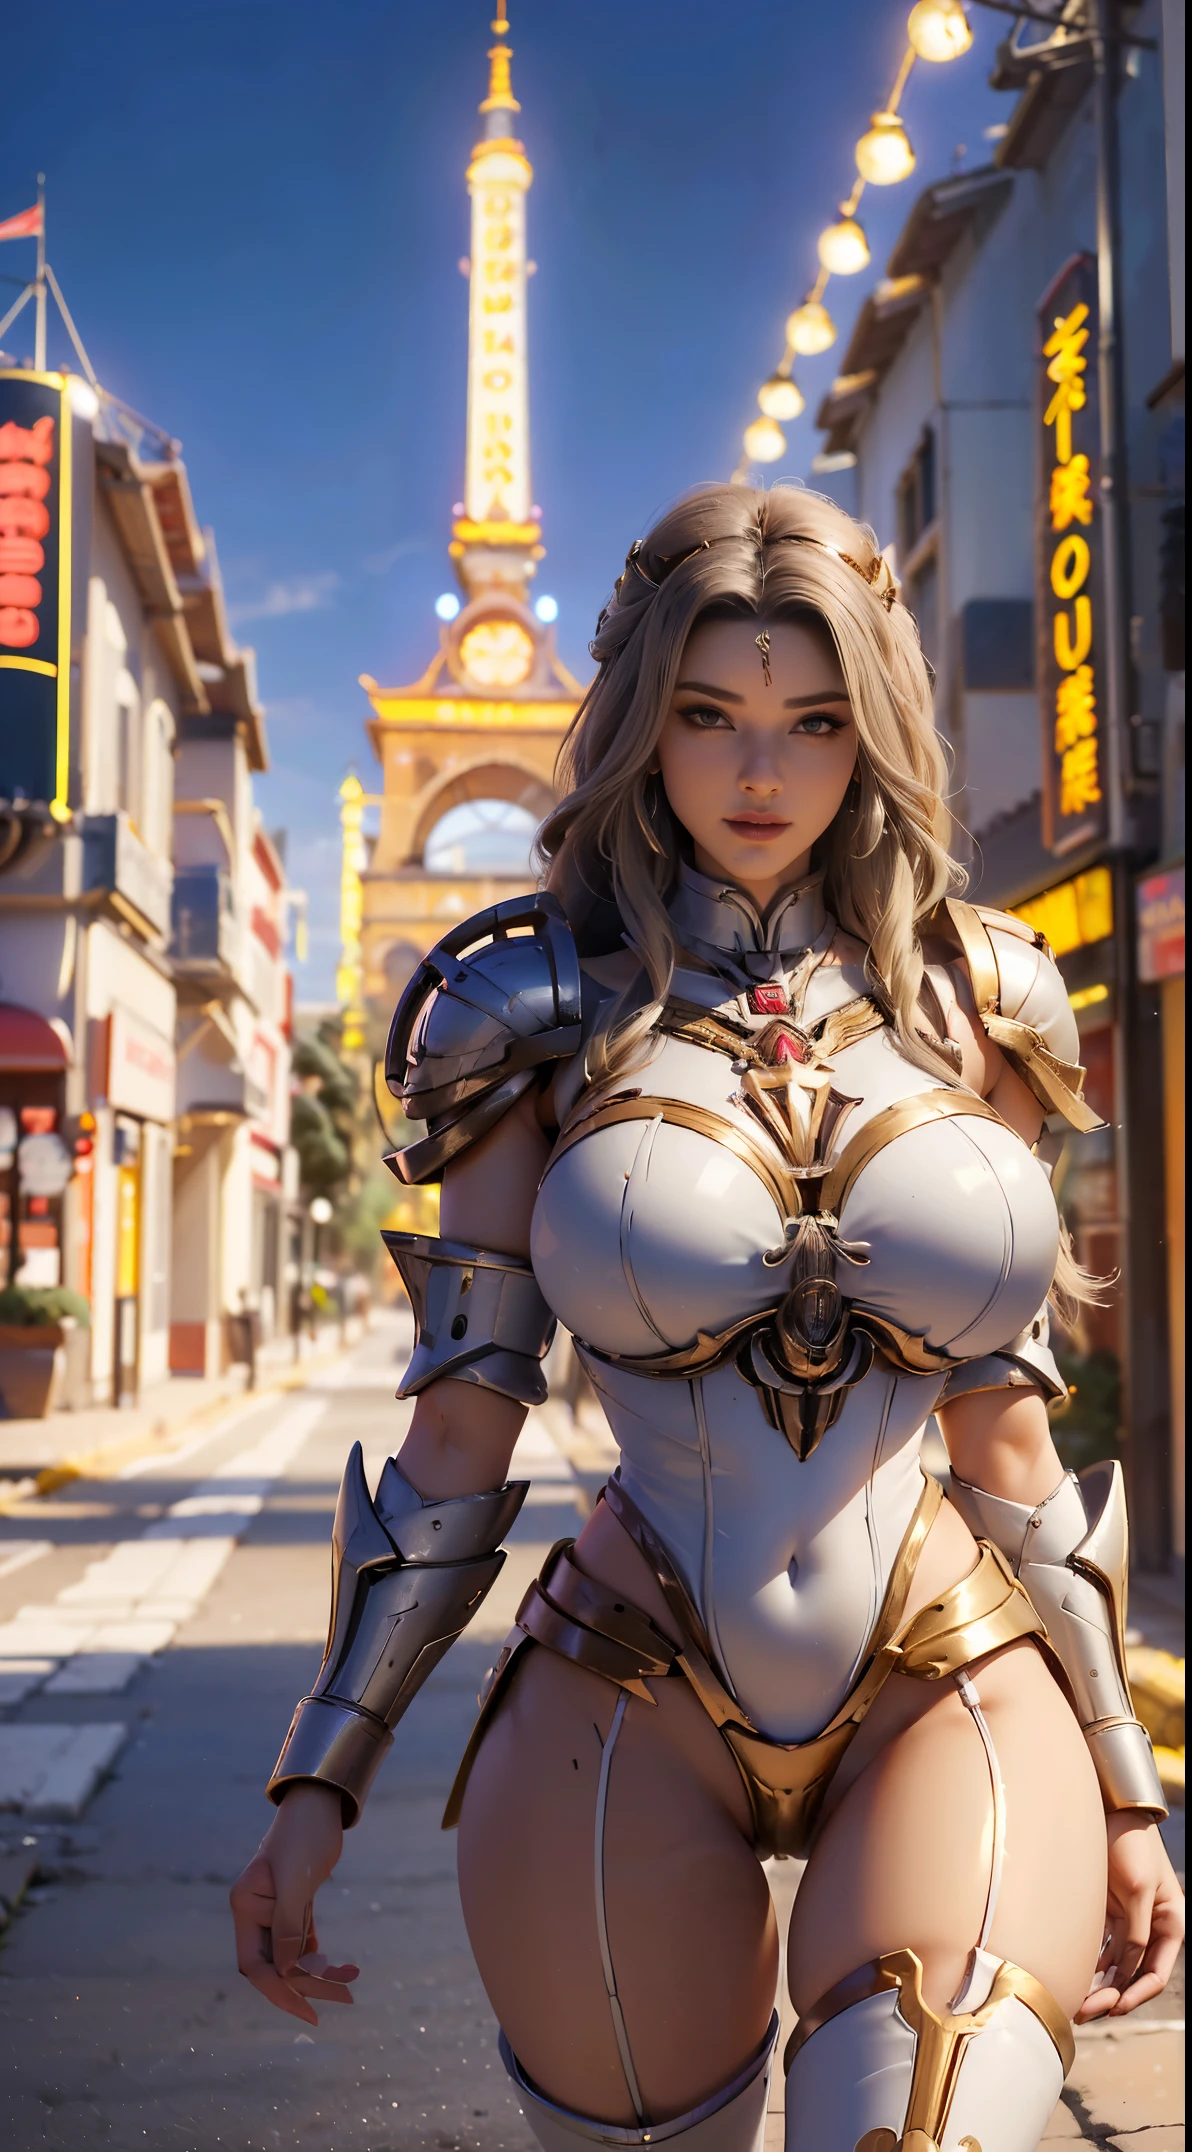 1 girl, Alone, (White long hair), (Huge fake tits:1.3), (GUARD ARM, glove), immortal, (White, red, air, FUTURISTIC MECHA ARMOR SUIT, Cape Royal, neckline:1.5), (skin tight yoga pants, high heels:1.2), (GLAMOROUS BODY NSFW, long sexy legs, whole body:1.3), (FROM THE FRONT, looking at the viewer:1), (WALKING DOWN THE NIGHT CITY STREET:1.3), physically based rendering, ultra high definition, 8k, 1080P.